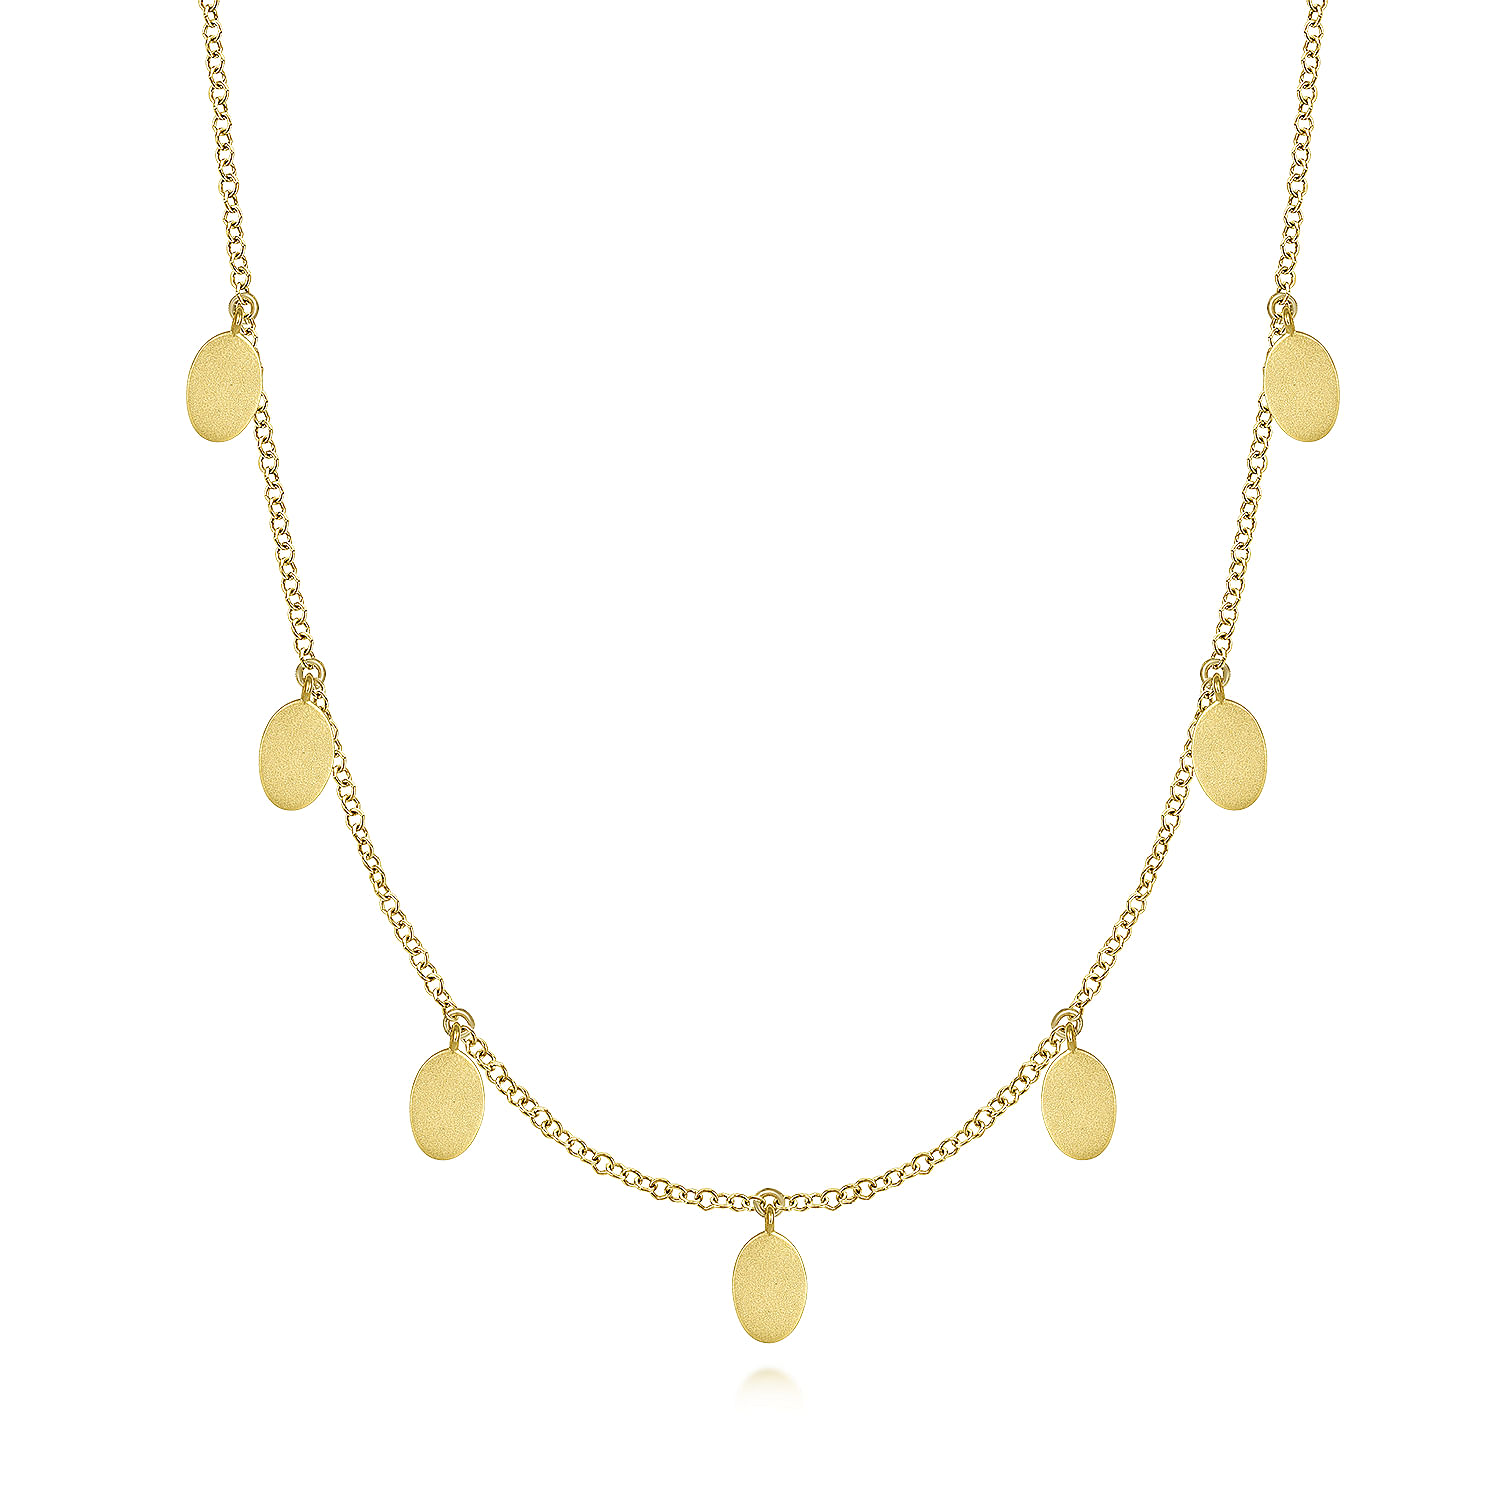 24 inch 14K Yellow Gold Necklace with Oval Shape Drops